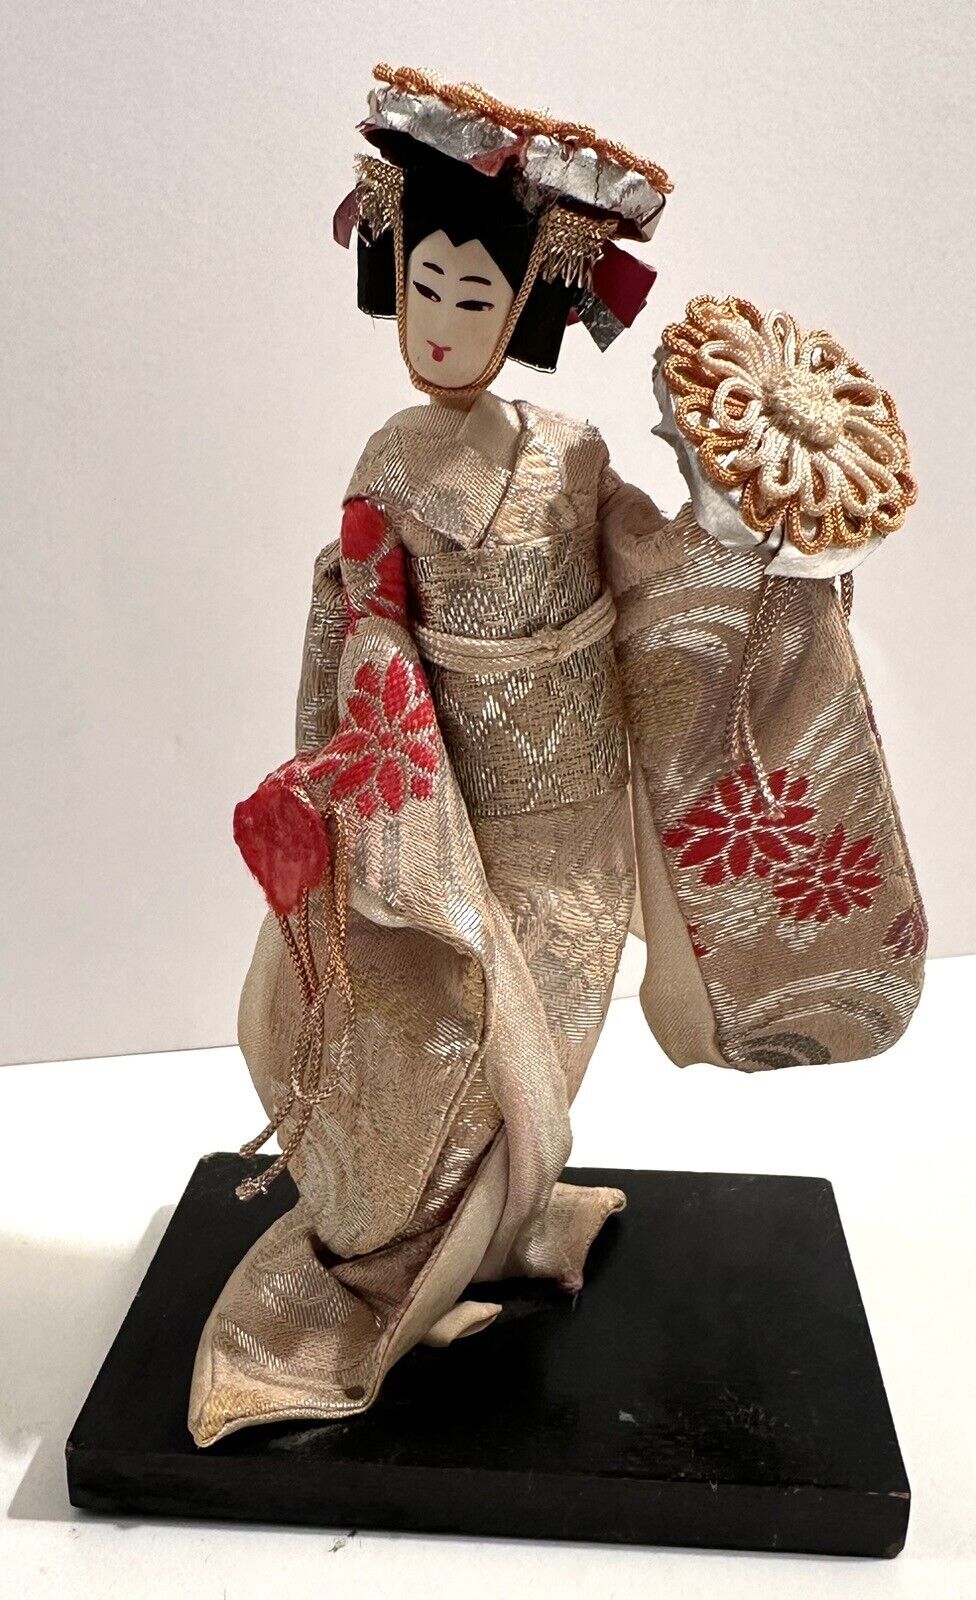 Vintage Japanese 1950’s Maiko Geisha Girl Handcrafted And Hand Painted In Japan